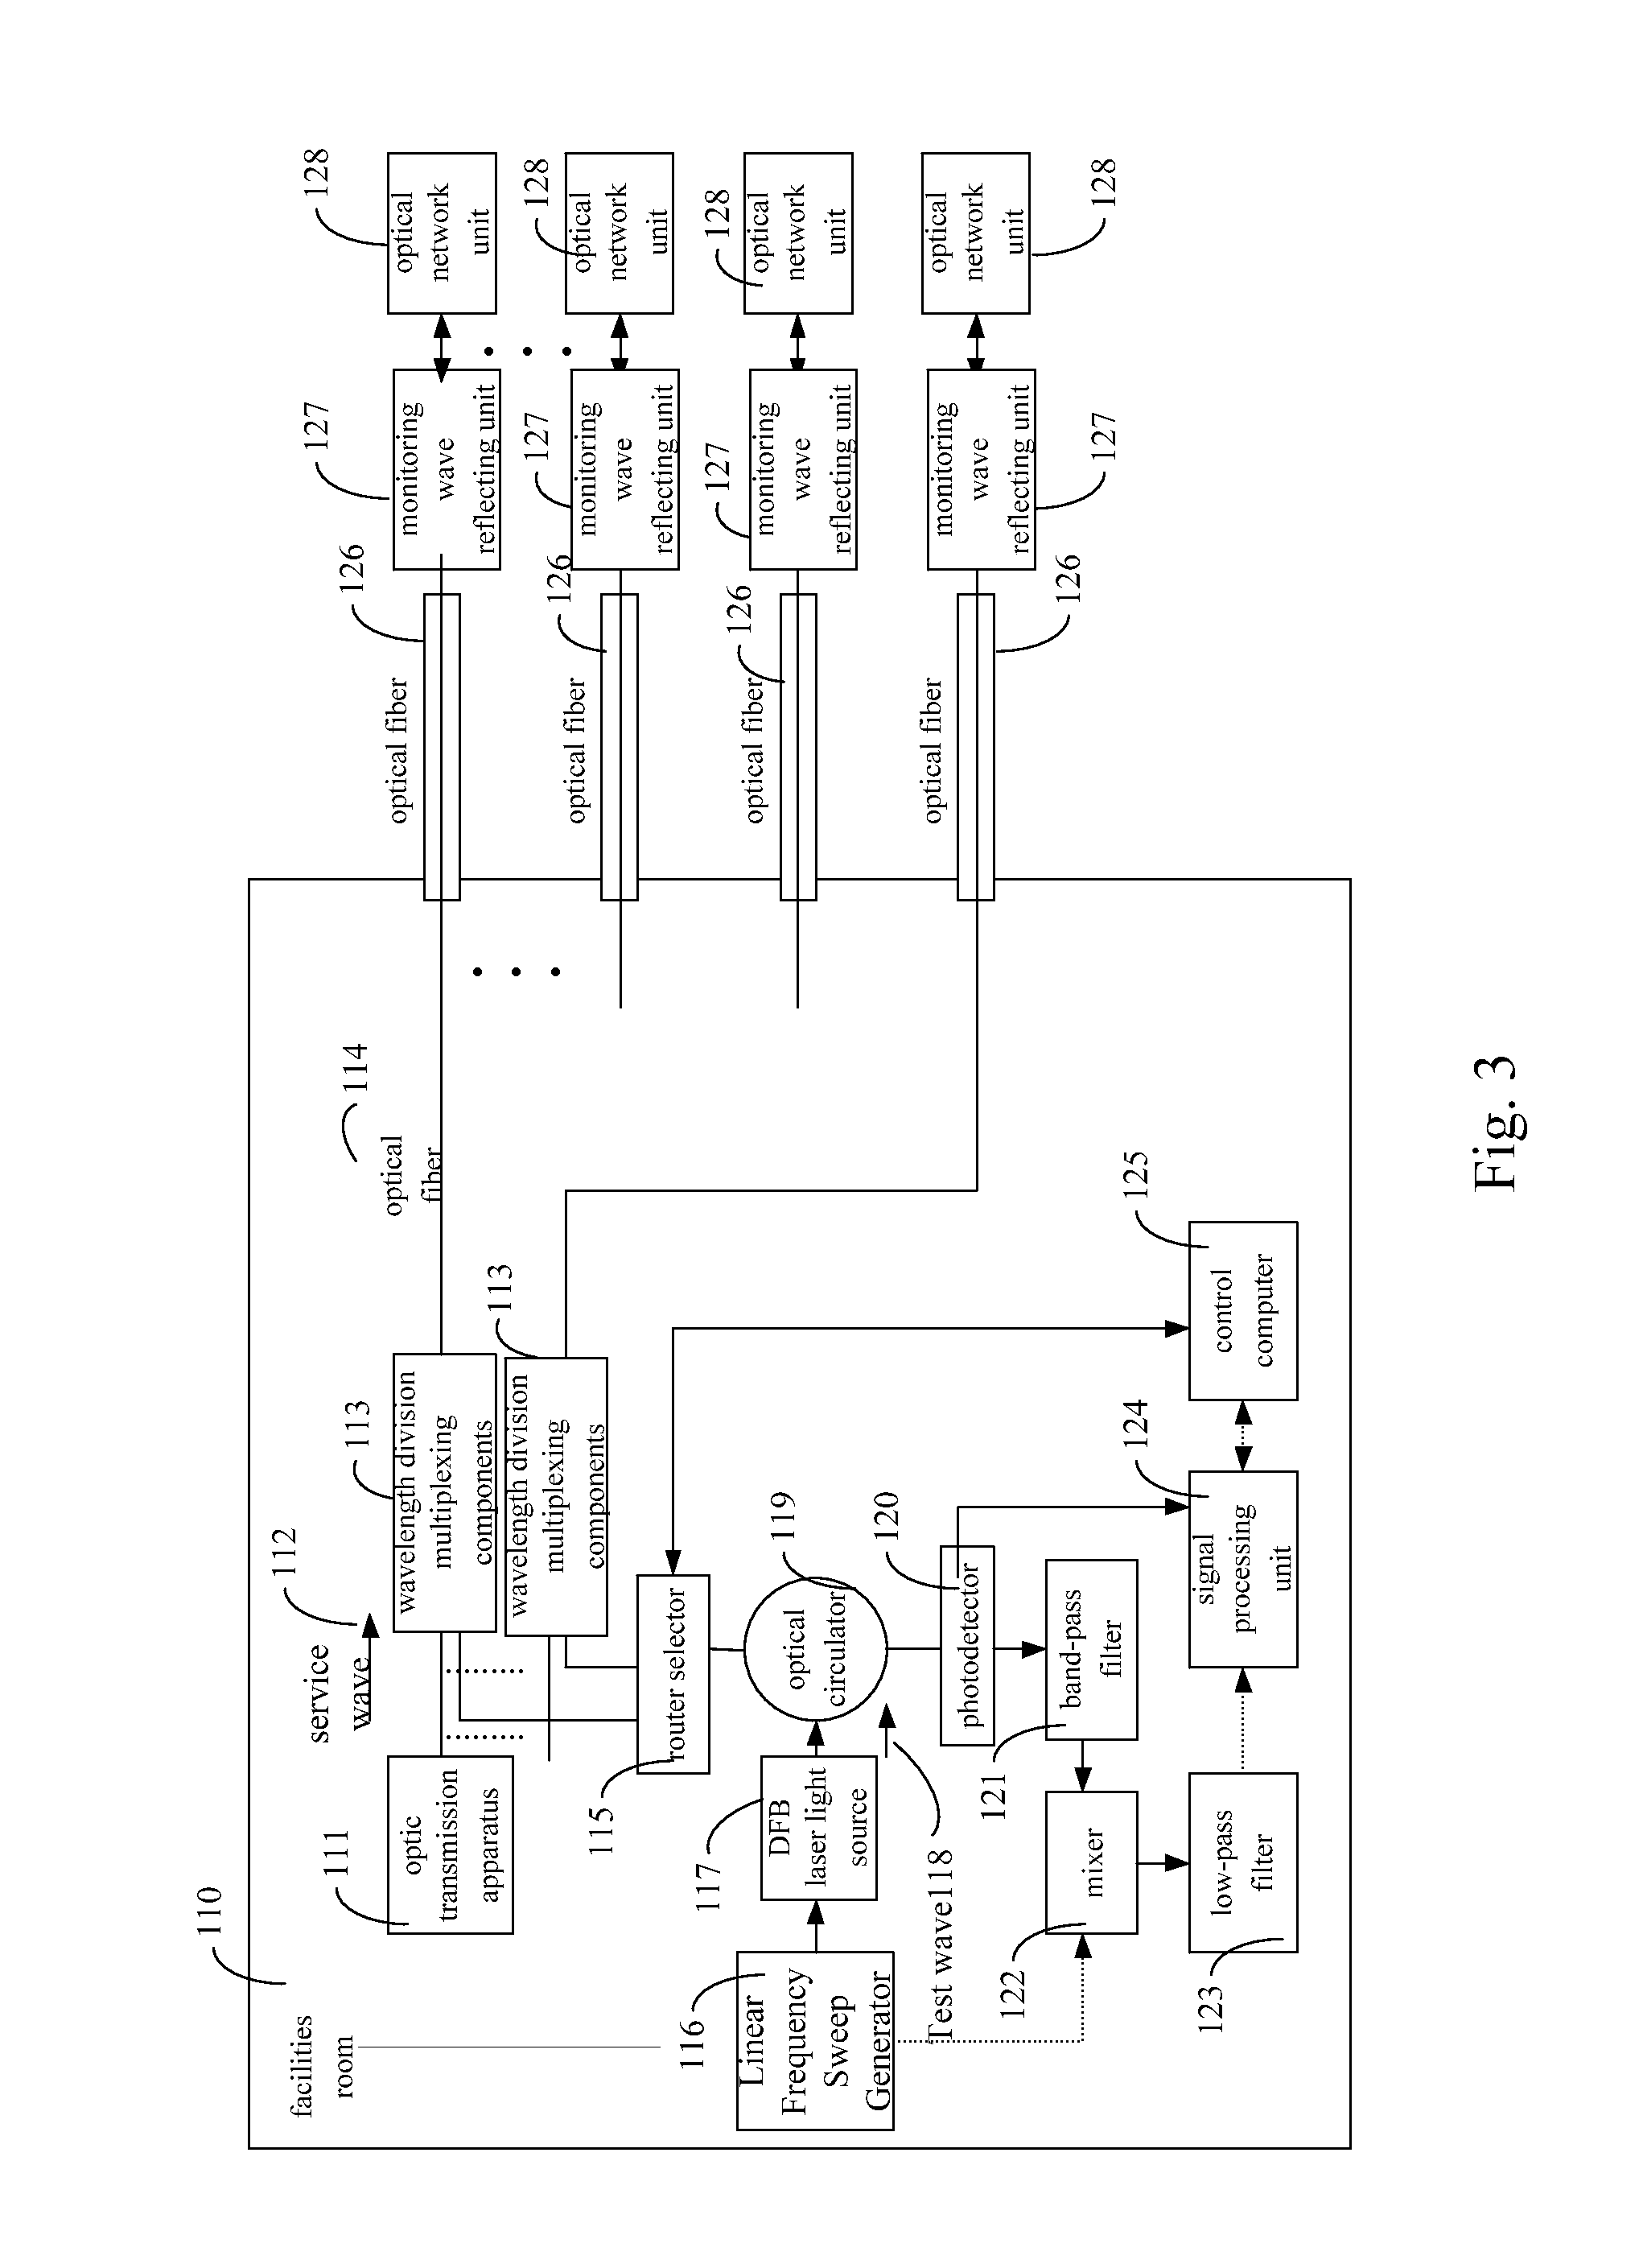 Optical fiber network test method of an optical frequency domain reflectometer